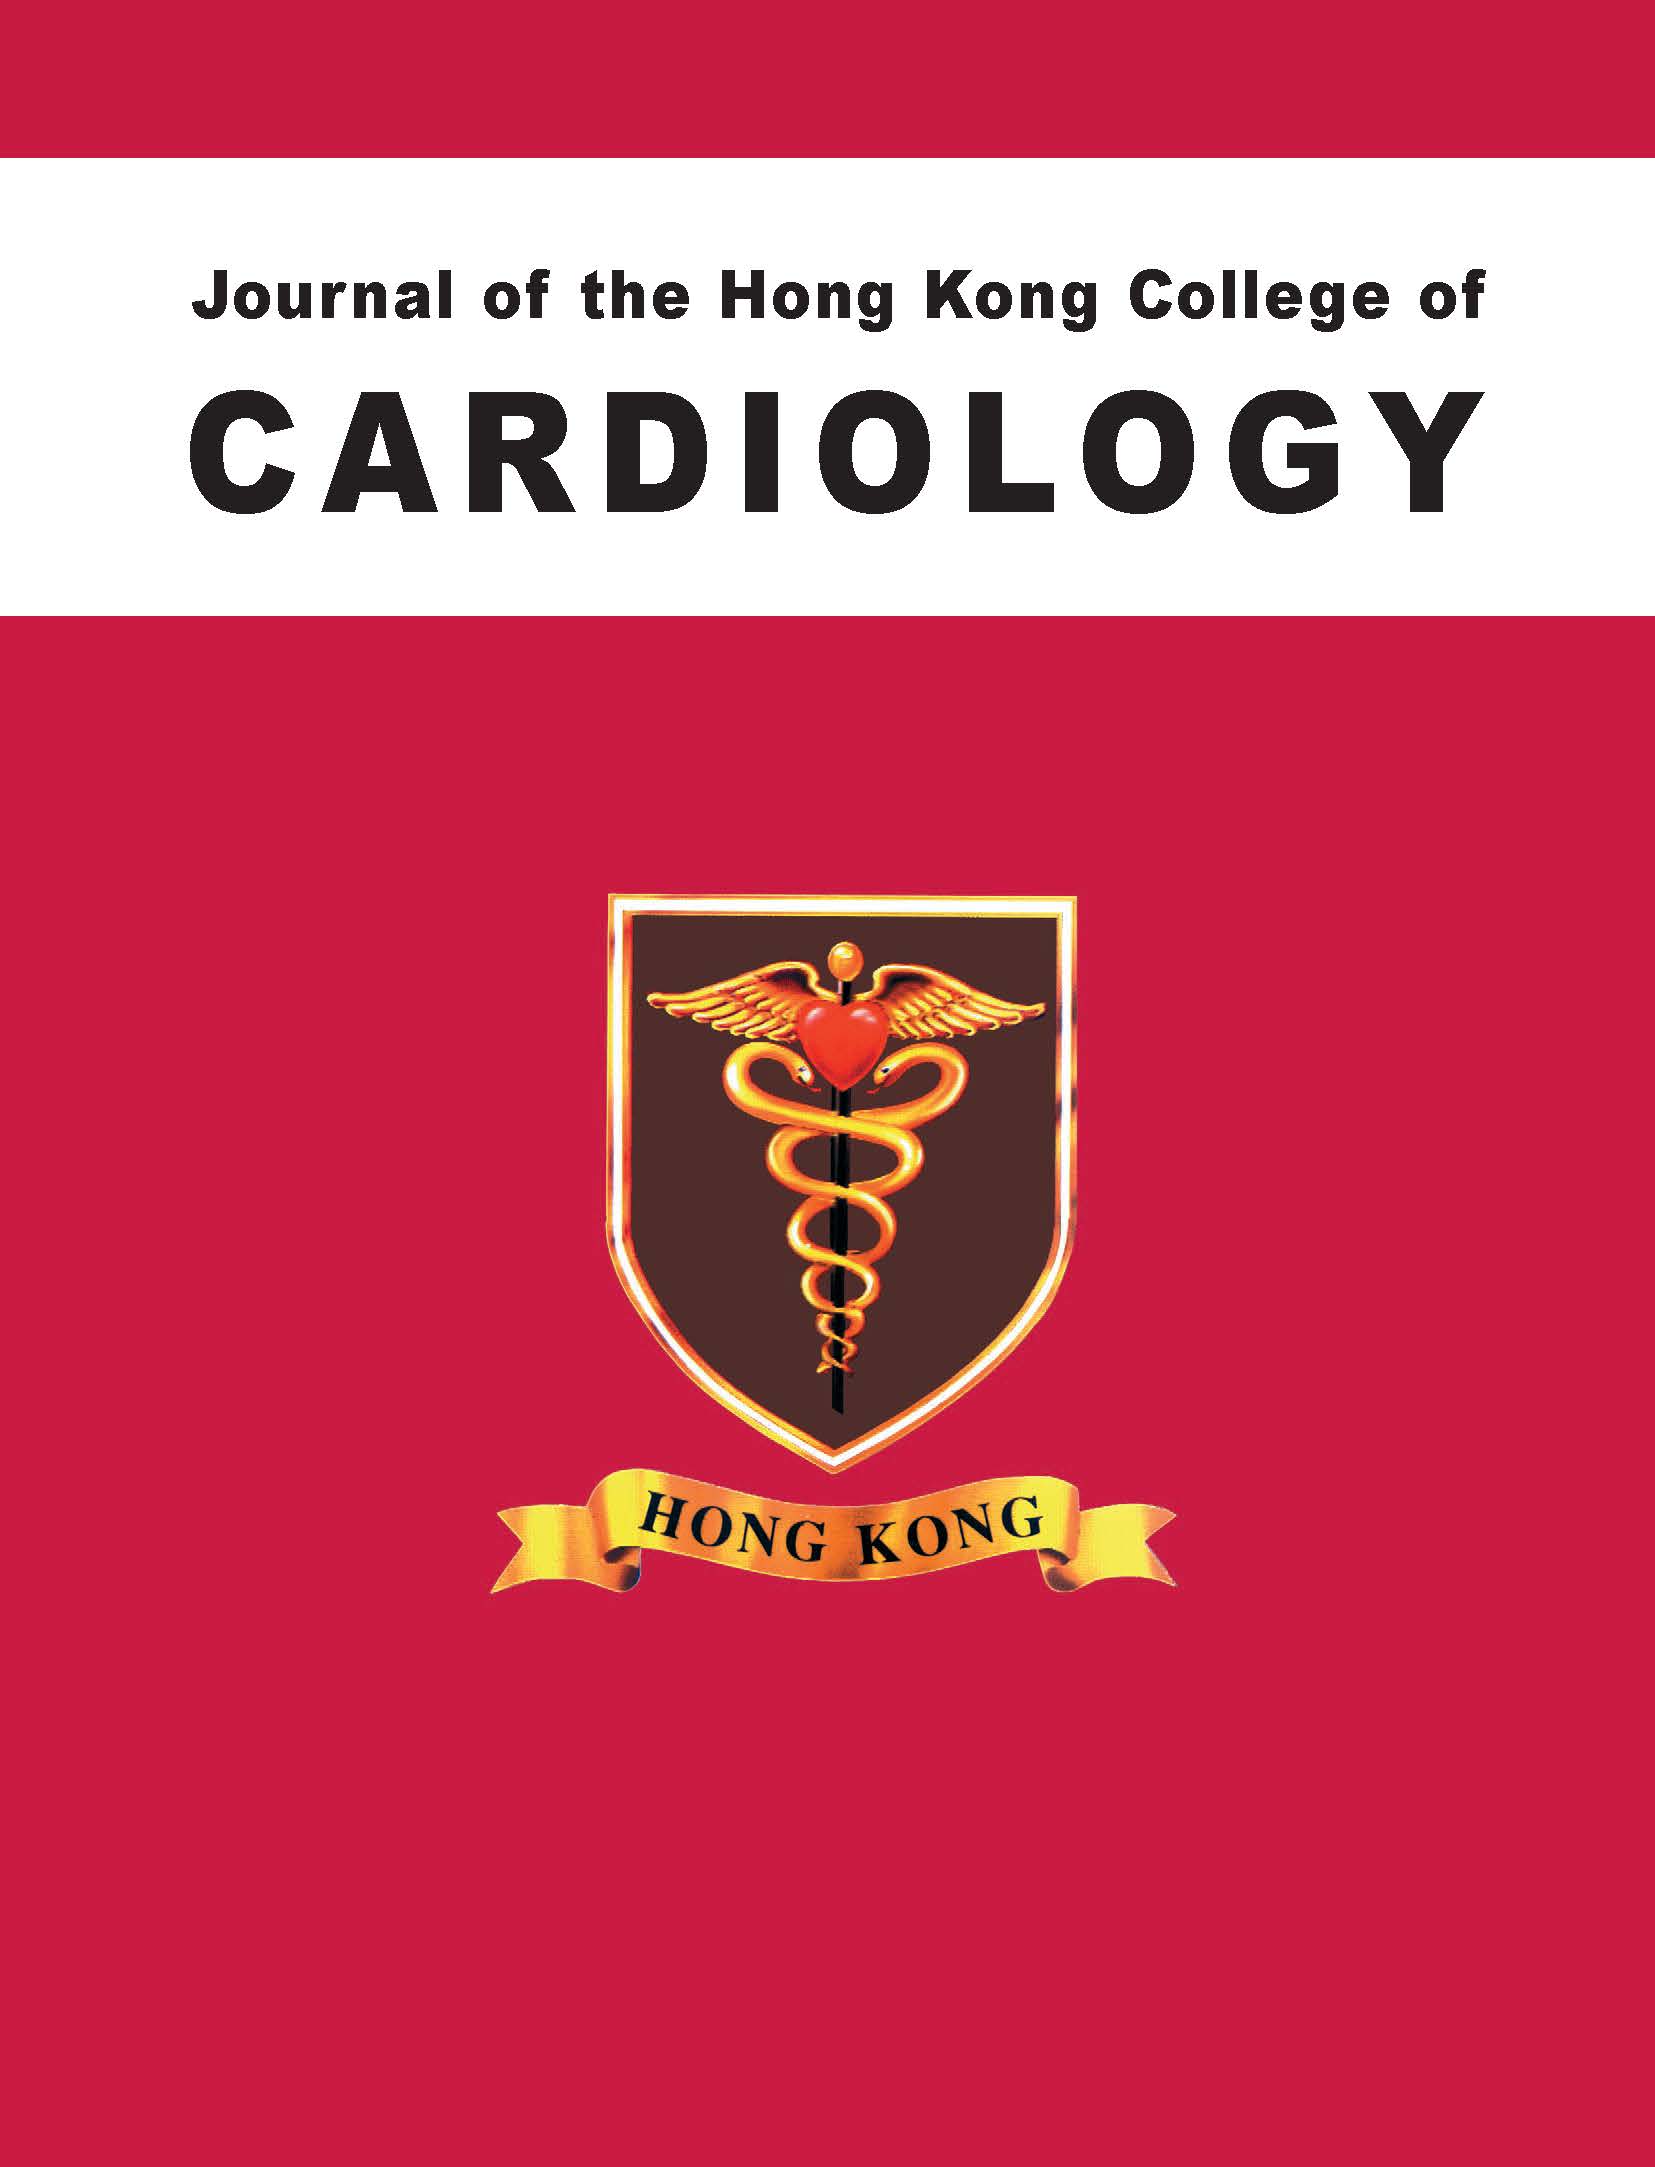 Journal of the Hong Kong College of Cardiology (JHKCC)